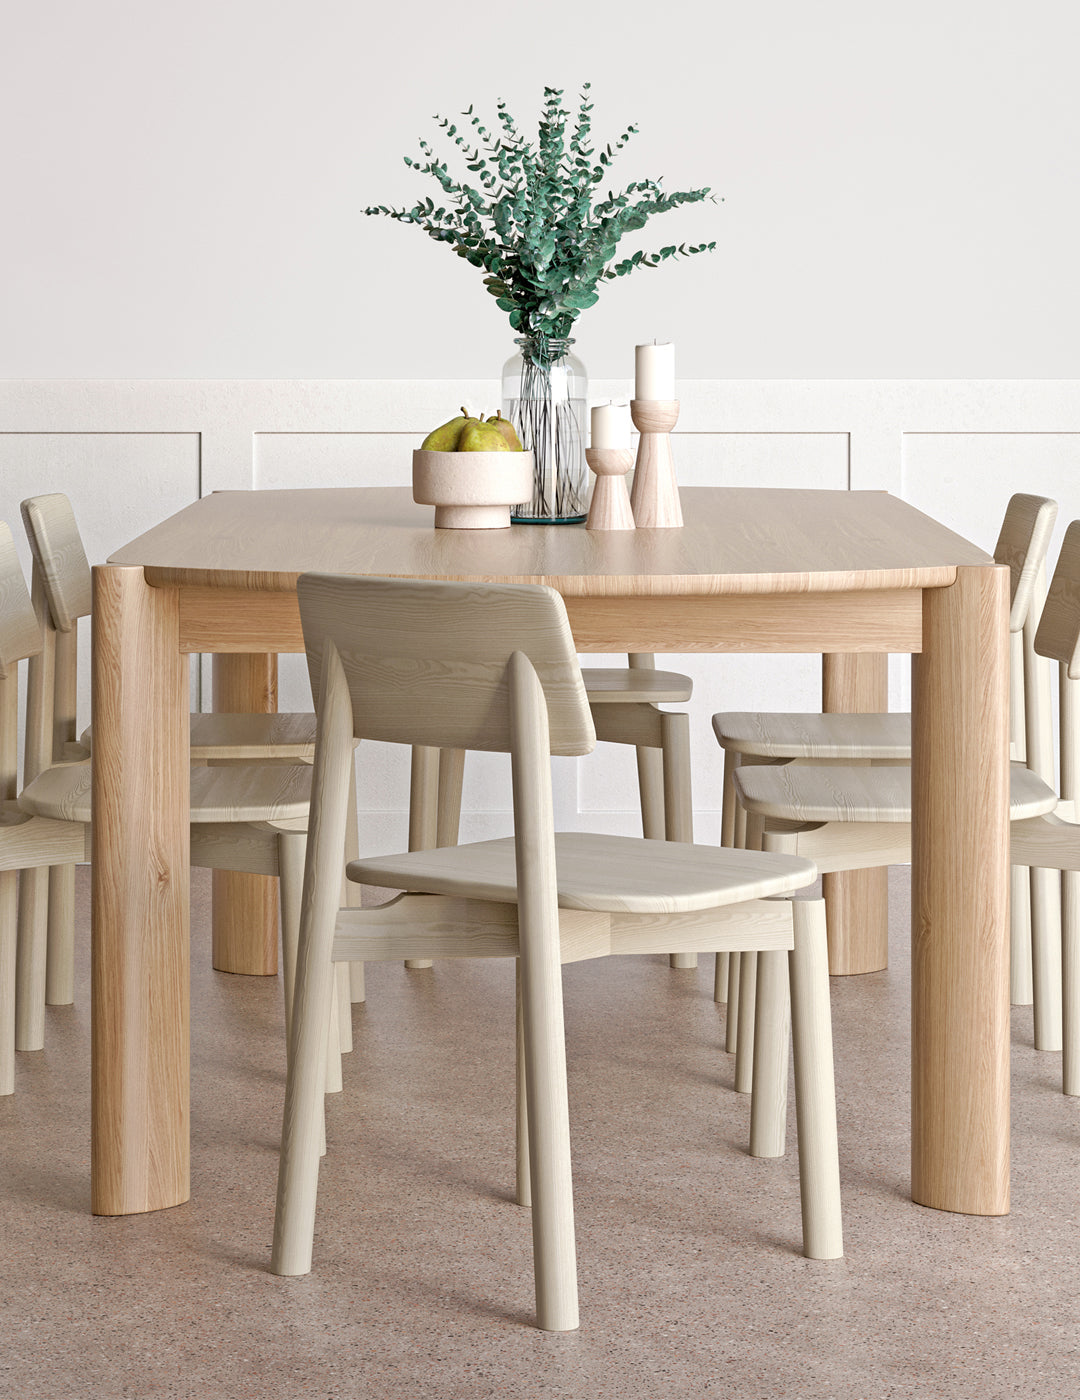 Bancroft Dining Table - More Options